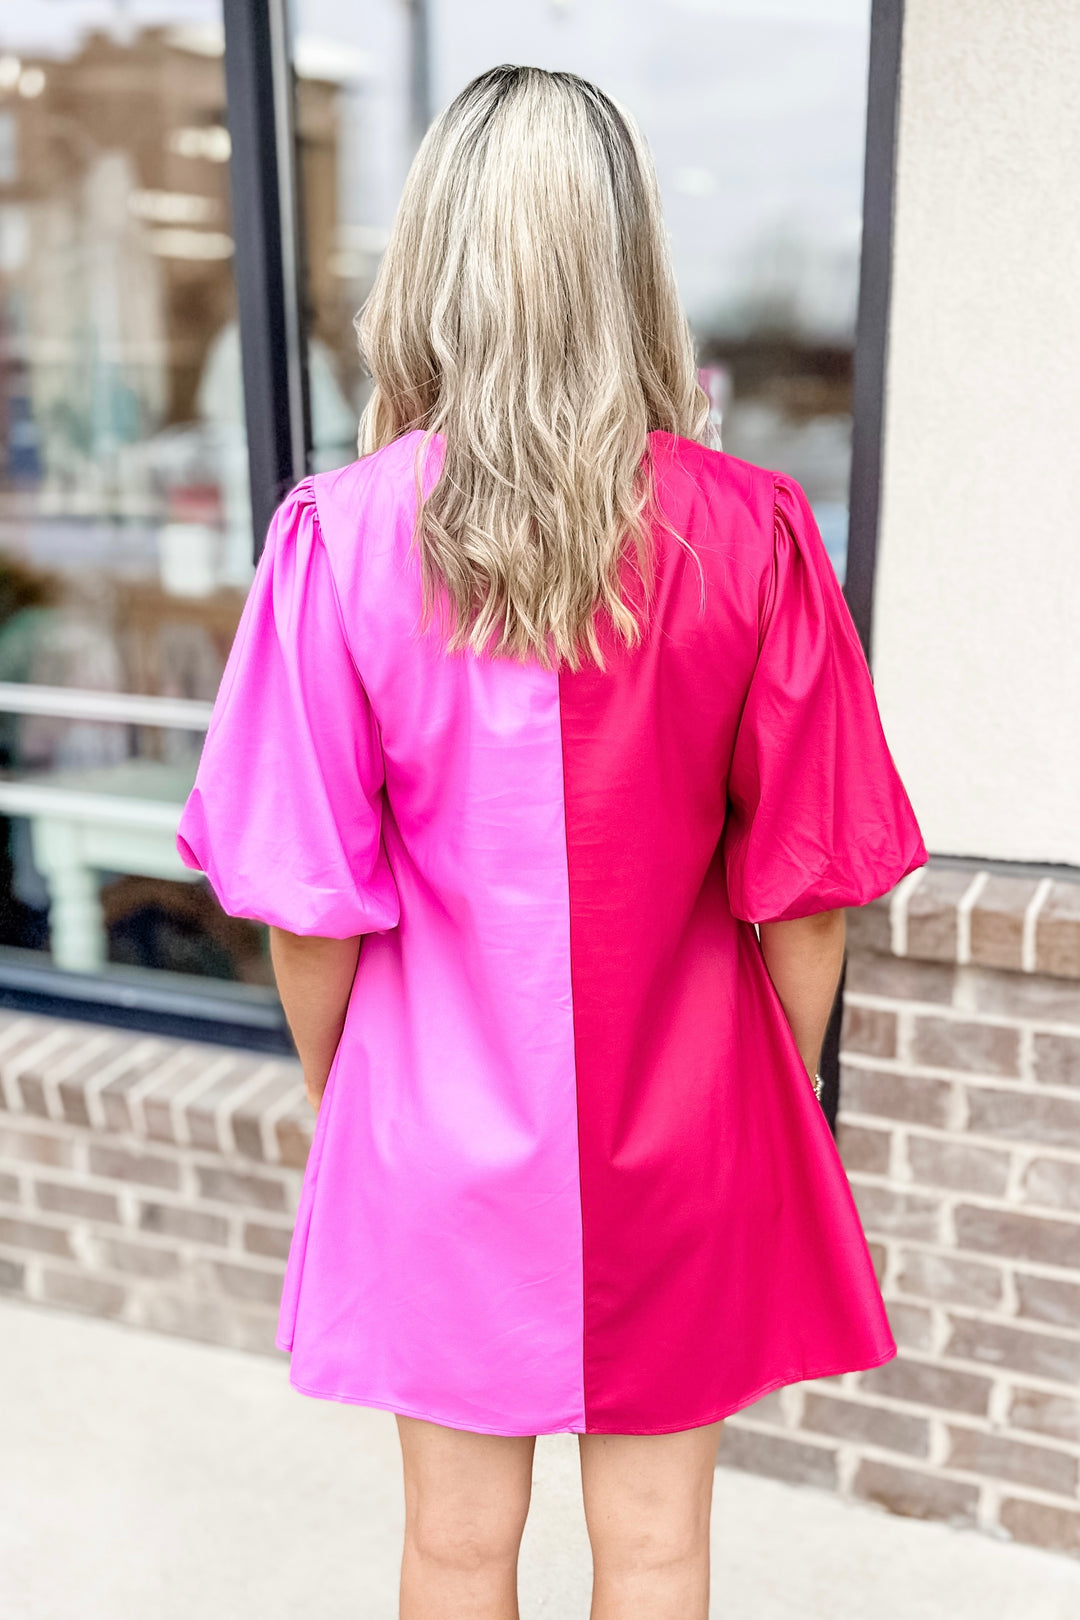 PINK & FUCHSIA FAUX LEATHER COLOR BLOCK DRESS